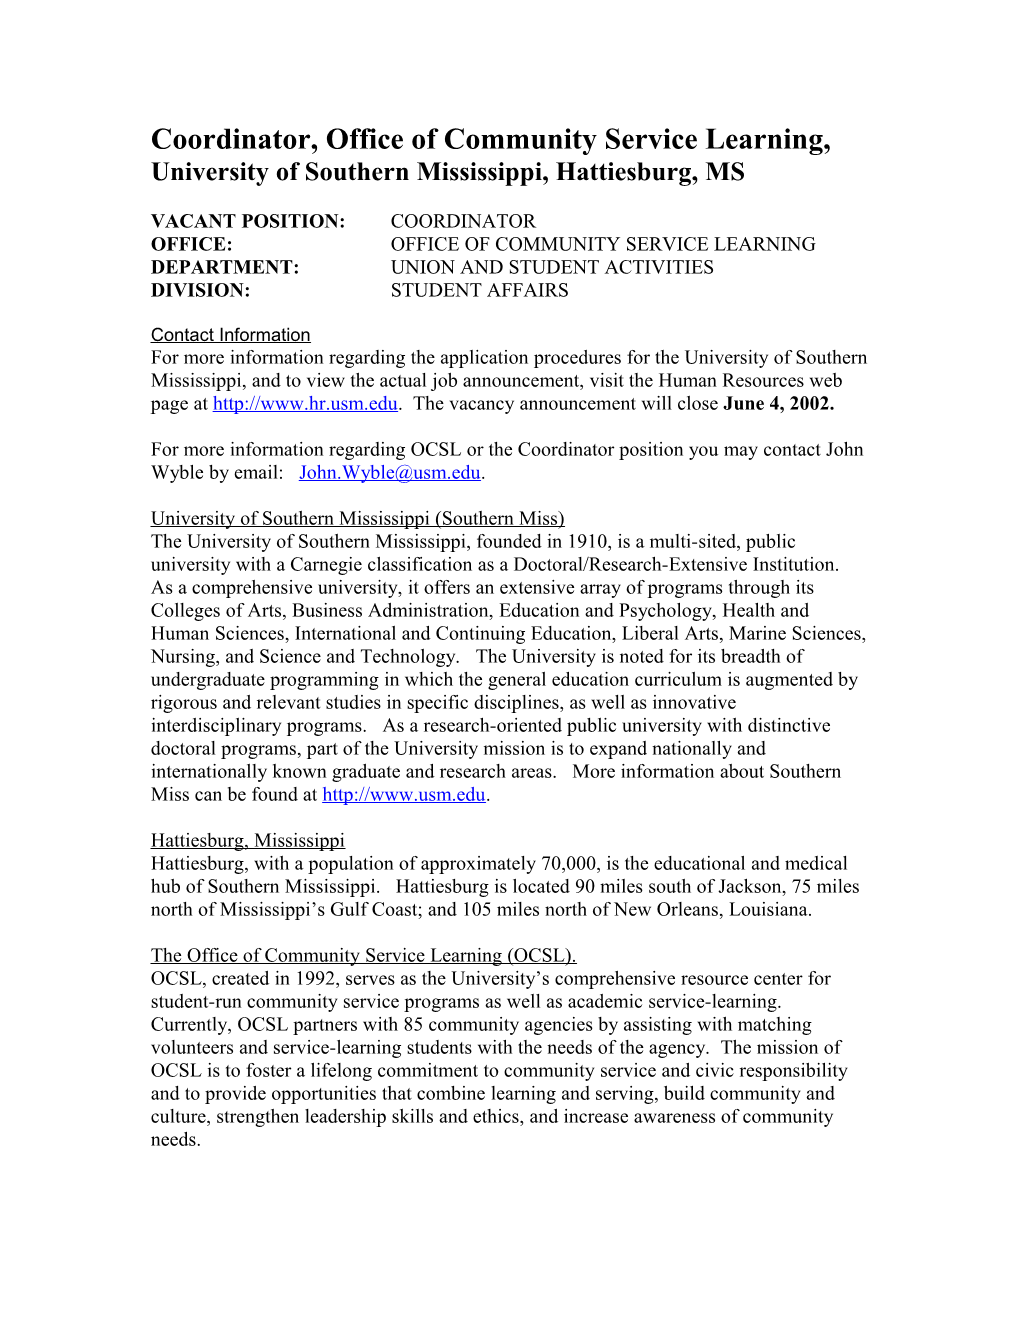 Coordinator, Office of Community Service Learning, University of Southern Mississippi